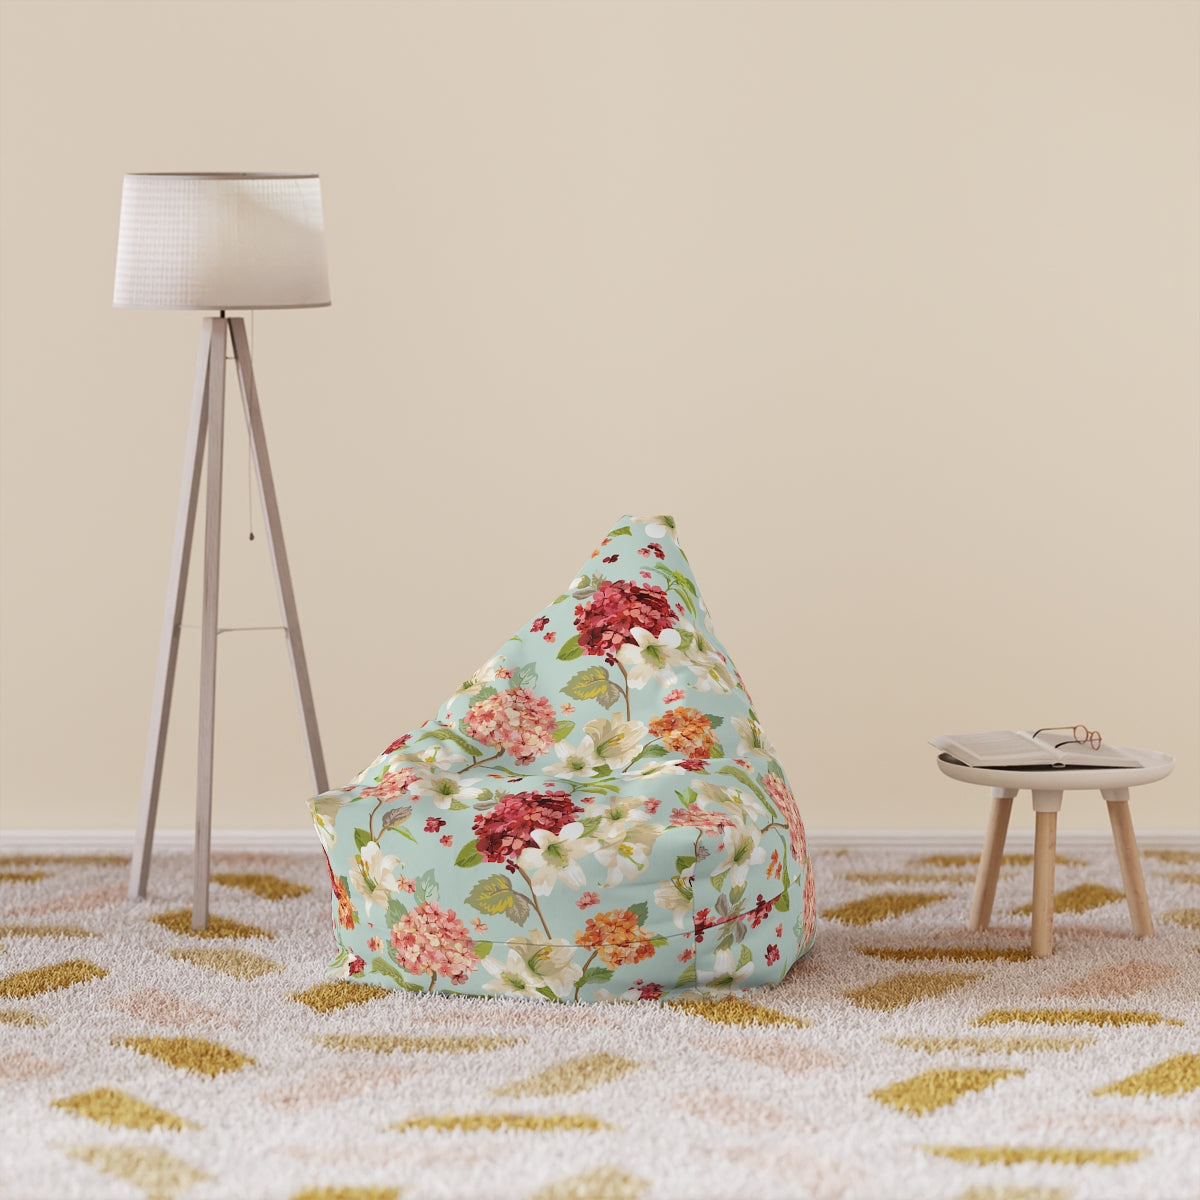 Autumn Hortensia and Lily Flowers Bean Bag Chair Cover